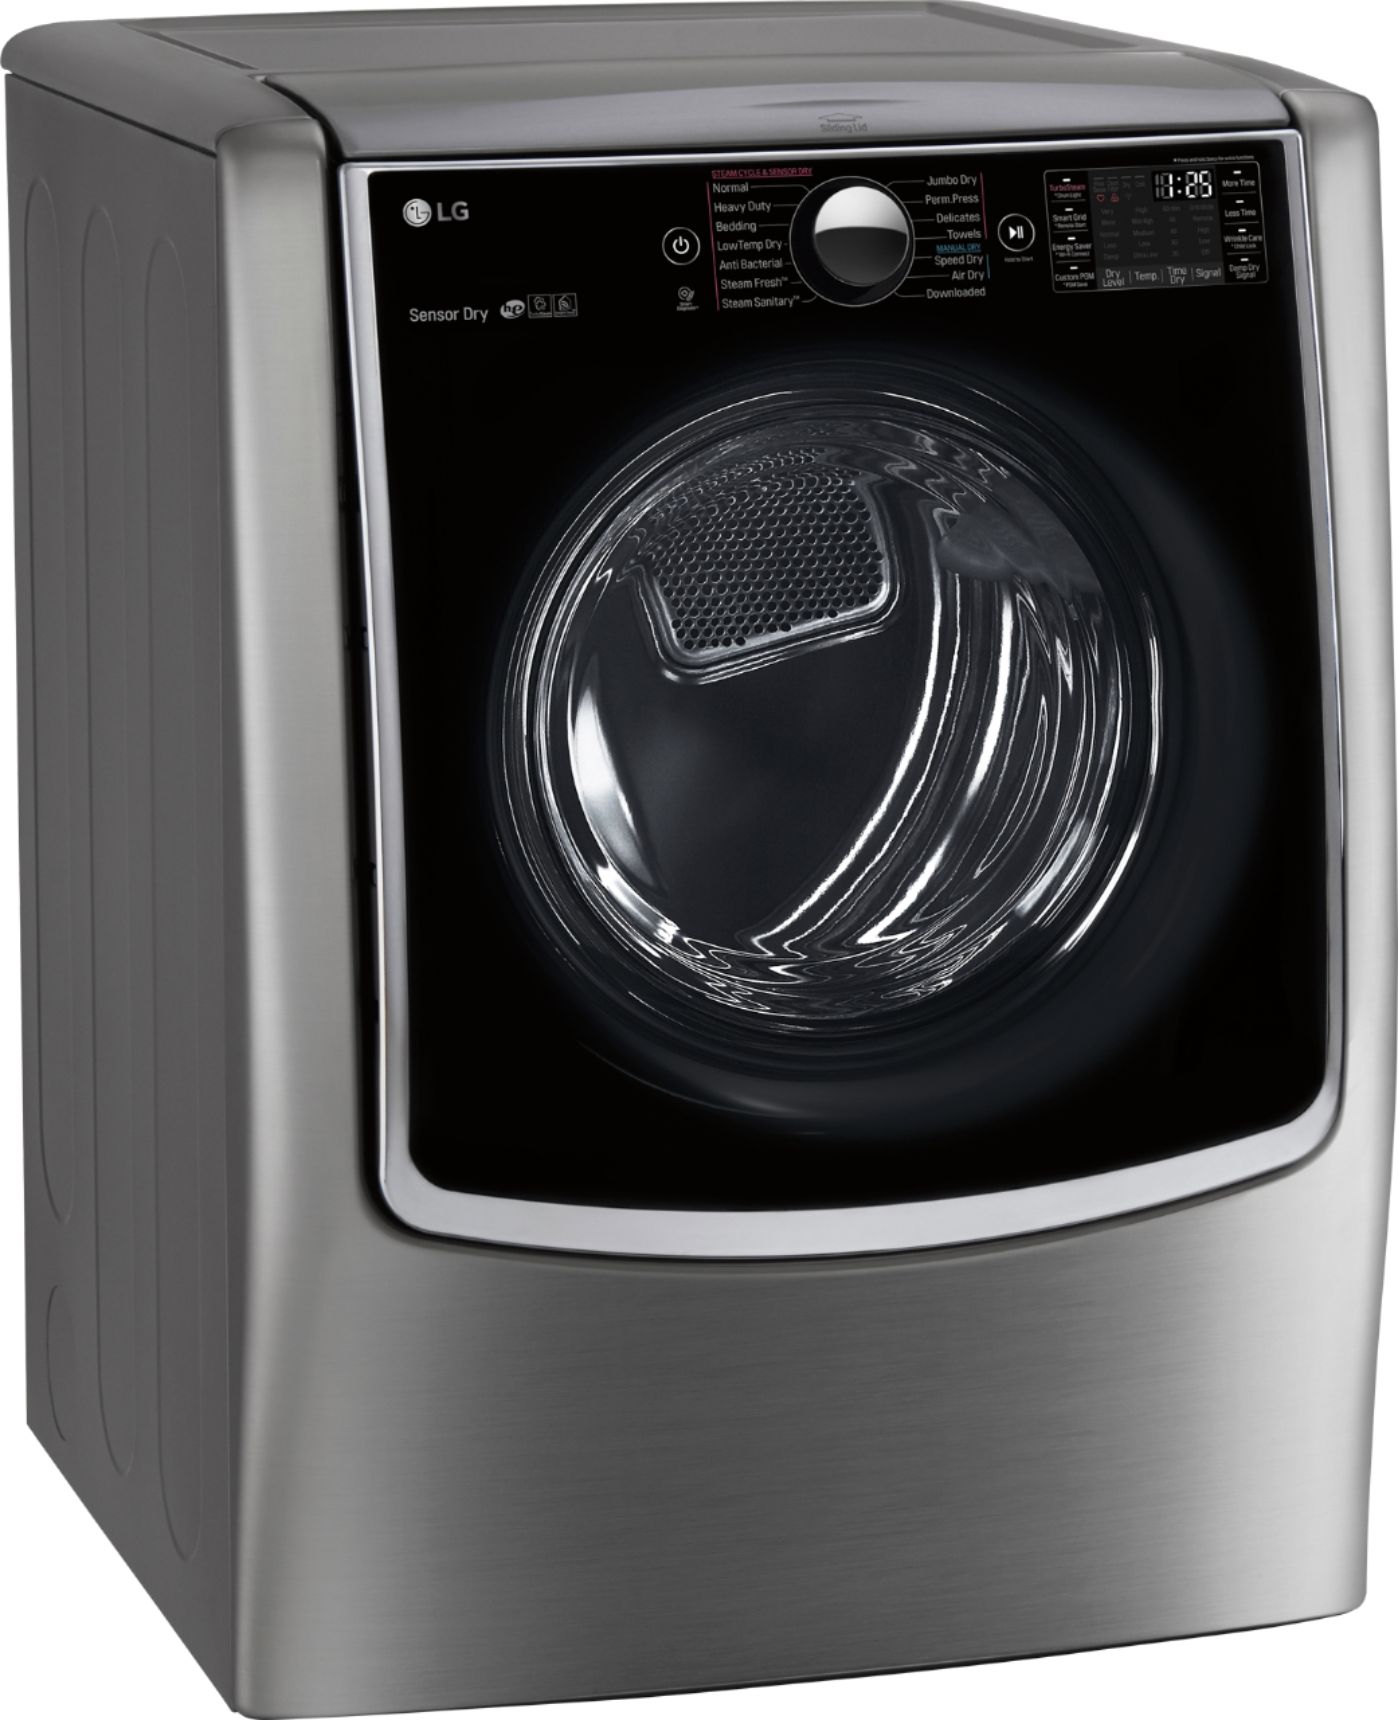 Angle View: LG - 9.0 Cu. Ft. Smart Electric Dryer with Steam and Sensor Dry - Graphite steel